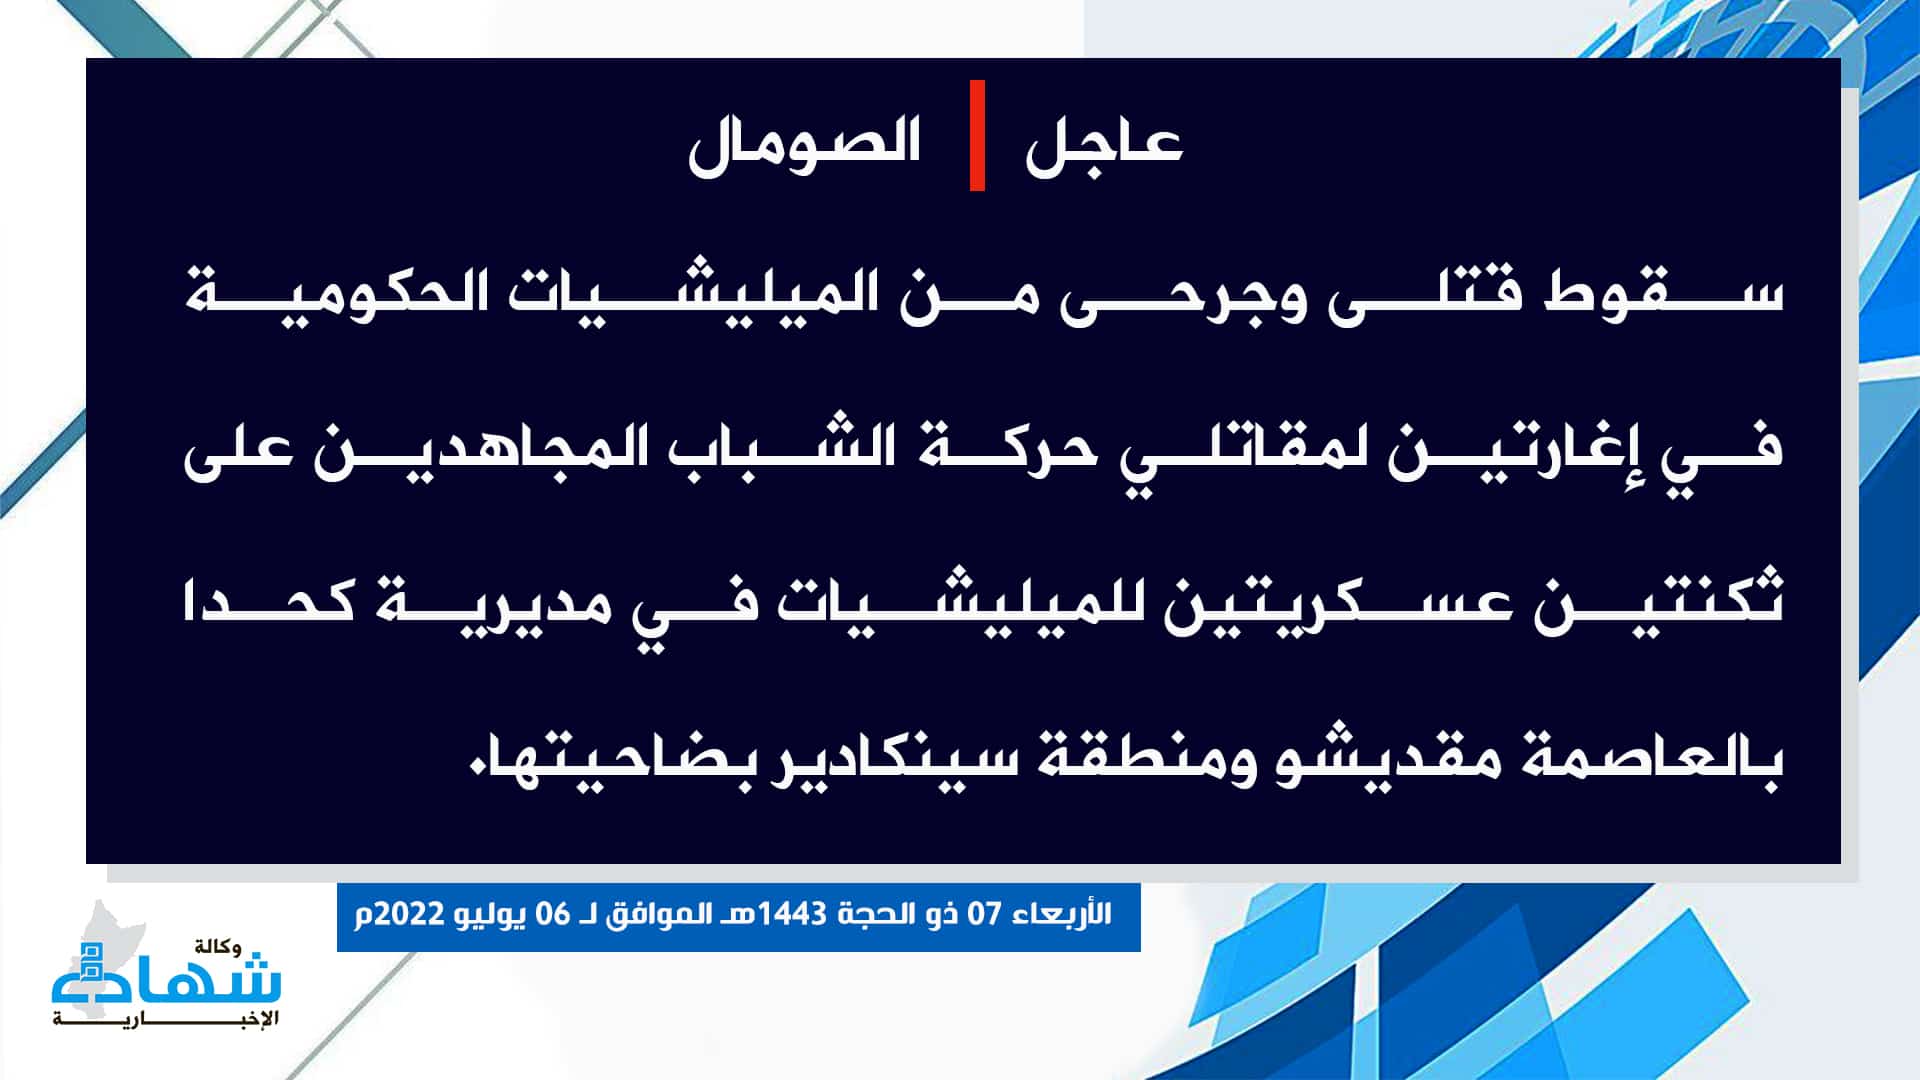 (Claim) al-Shabaab: Several Somalian Forces Were Killed and Injured in Two Attacks on Somalian Military Positions in Kahda and Sinkadir Districts, Mogadishu, Somalia - 6 July 2022